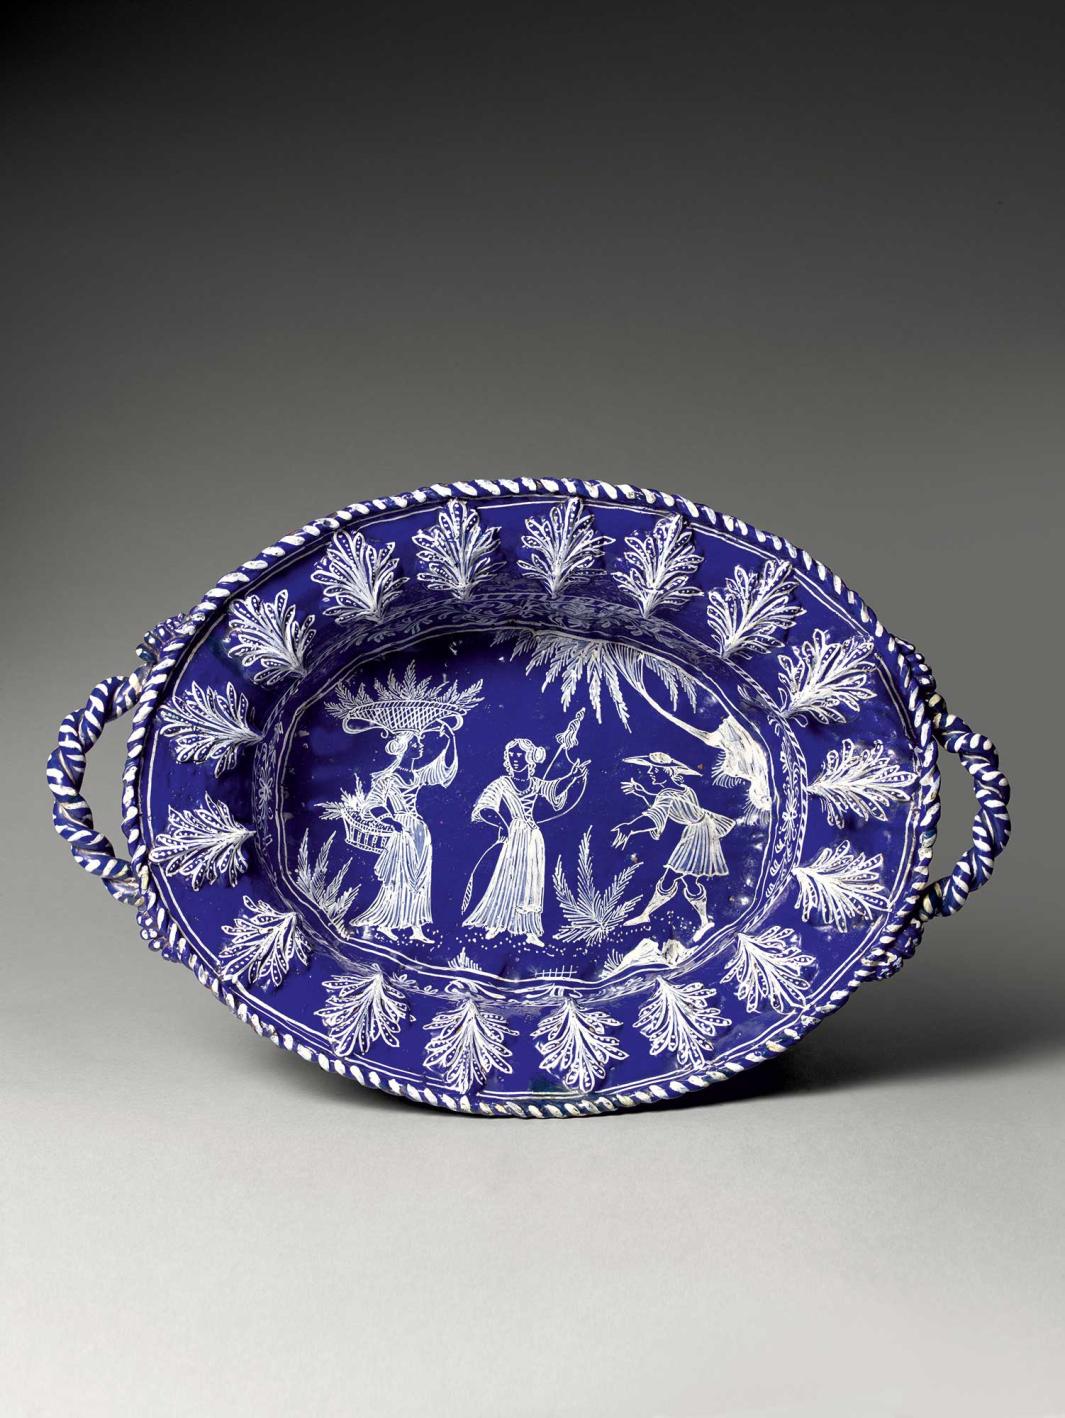 Blue earthenware basin with a three figures at the center and plants around the edge in white